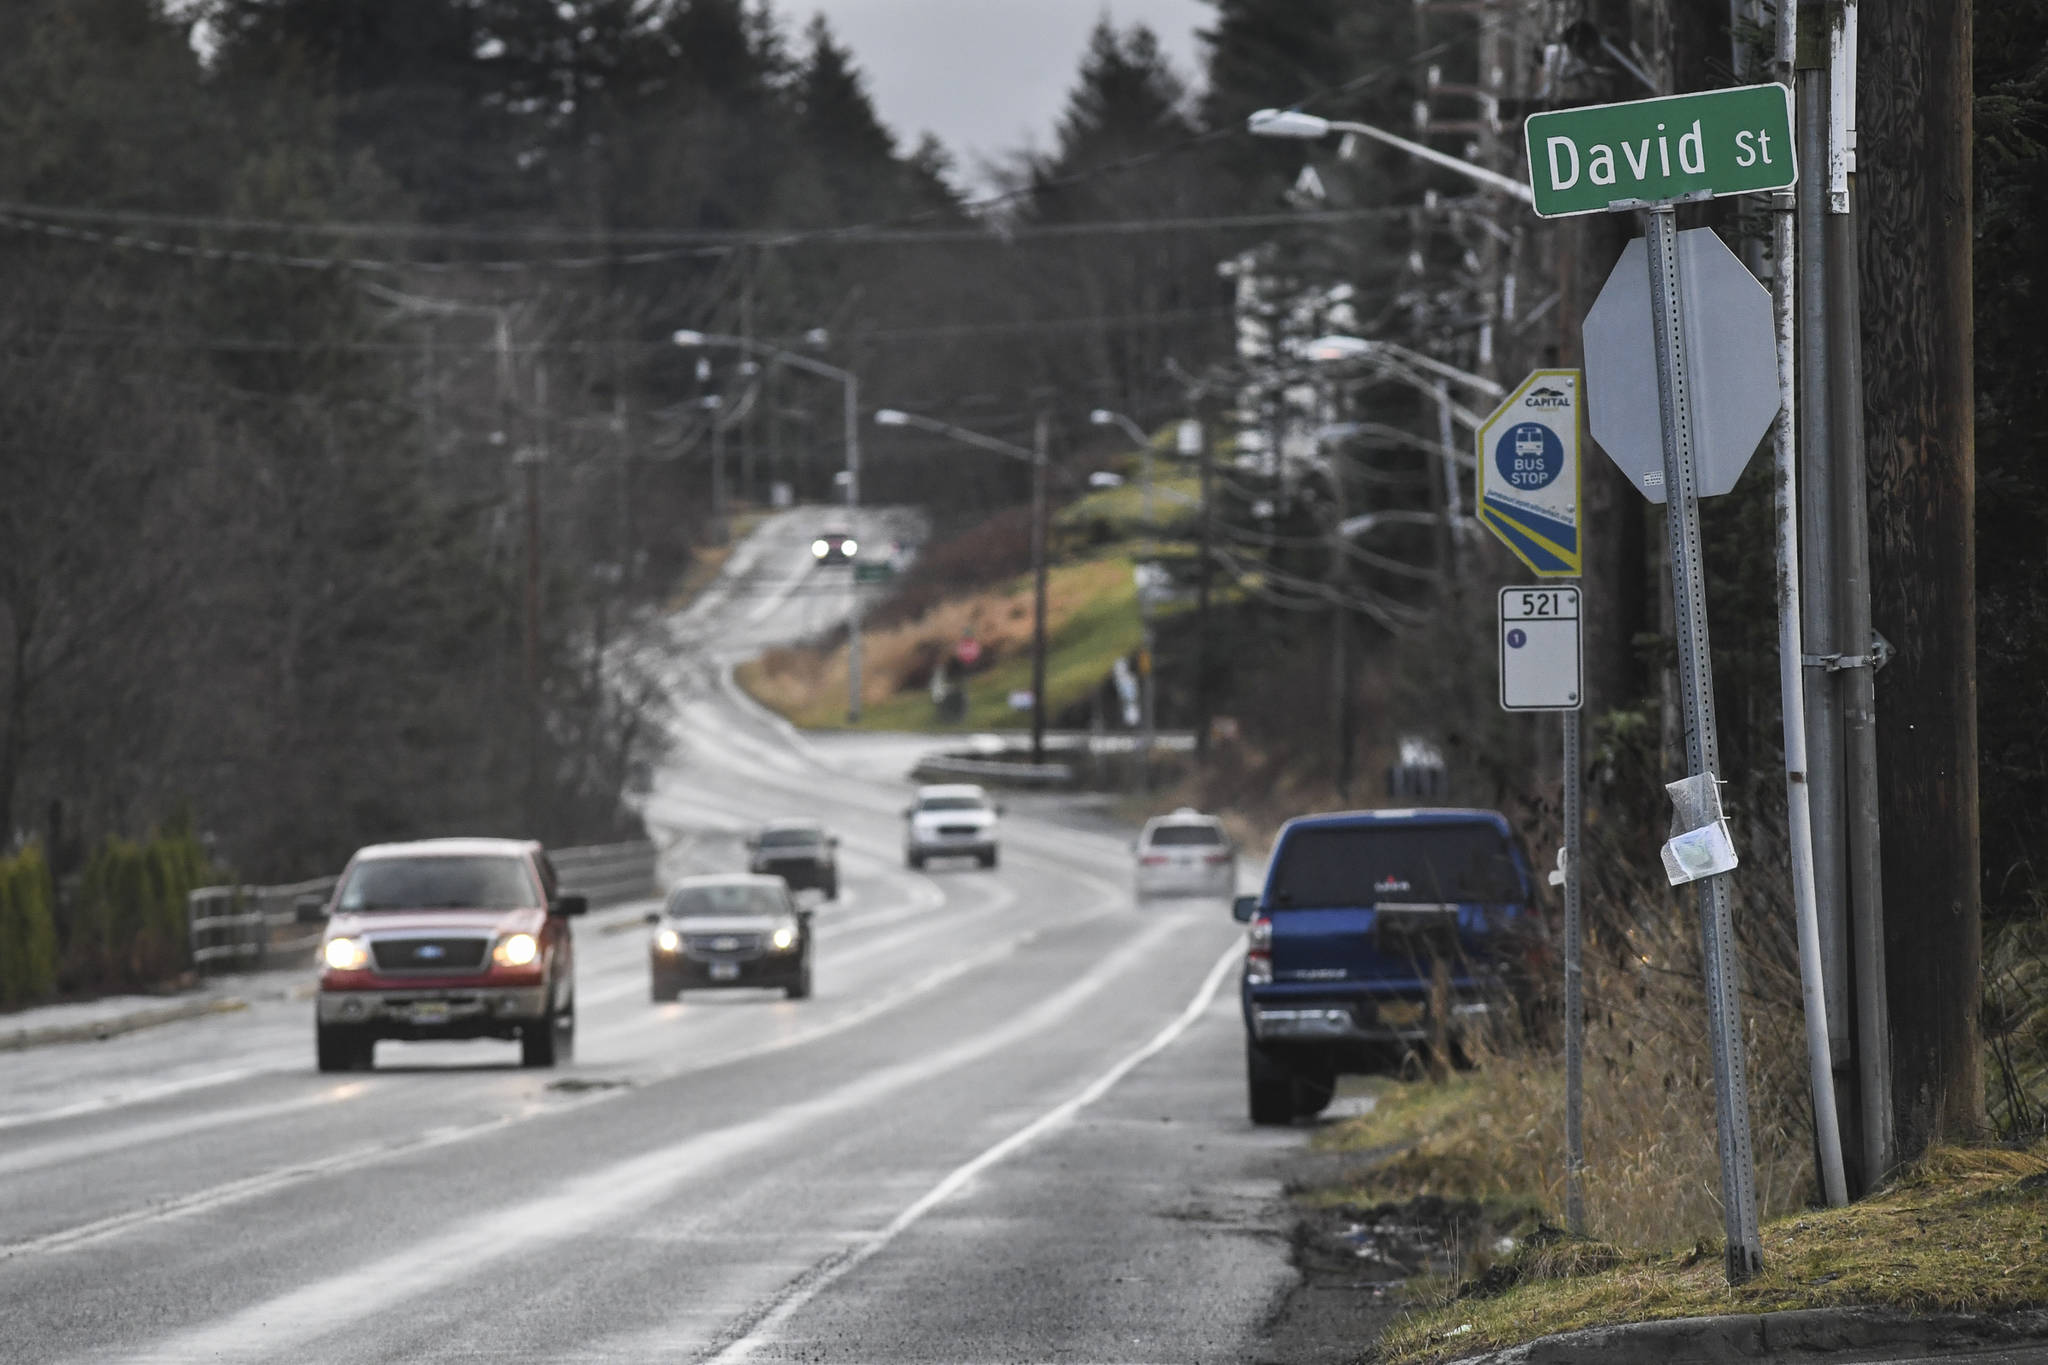 A project to replace nearly a mile of aging water line along the Douglas Highway, from the David Street intersection to Crow Hill pump station, is among the drinking water projects targeted for funding in 2020, according to a release from the EPA. (Michael Penn | Juneau Empire)